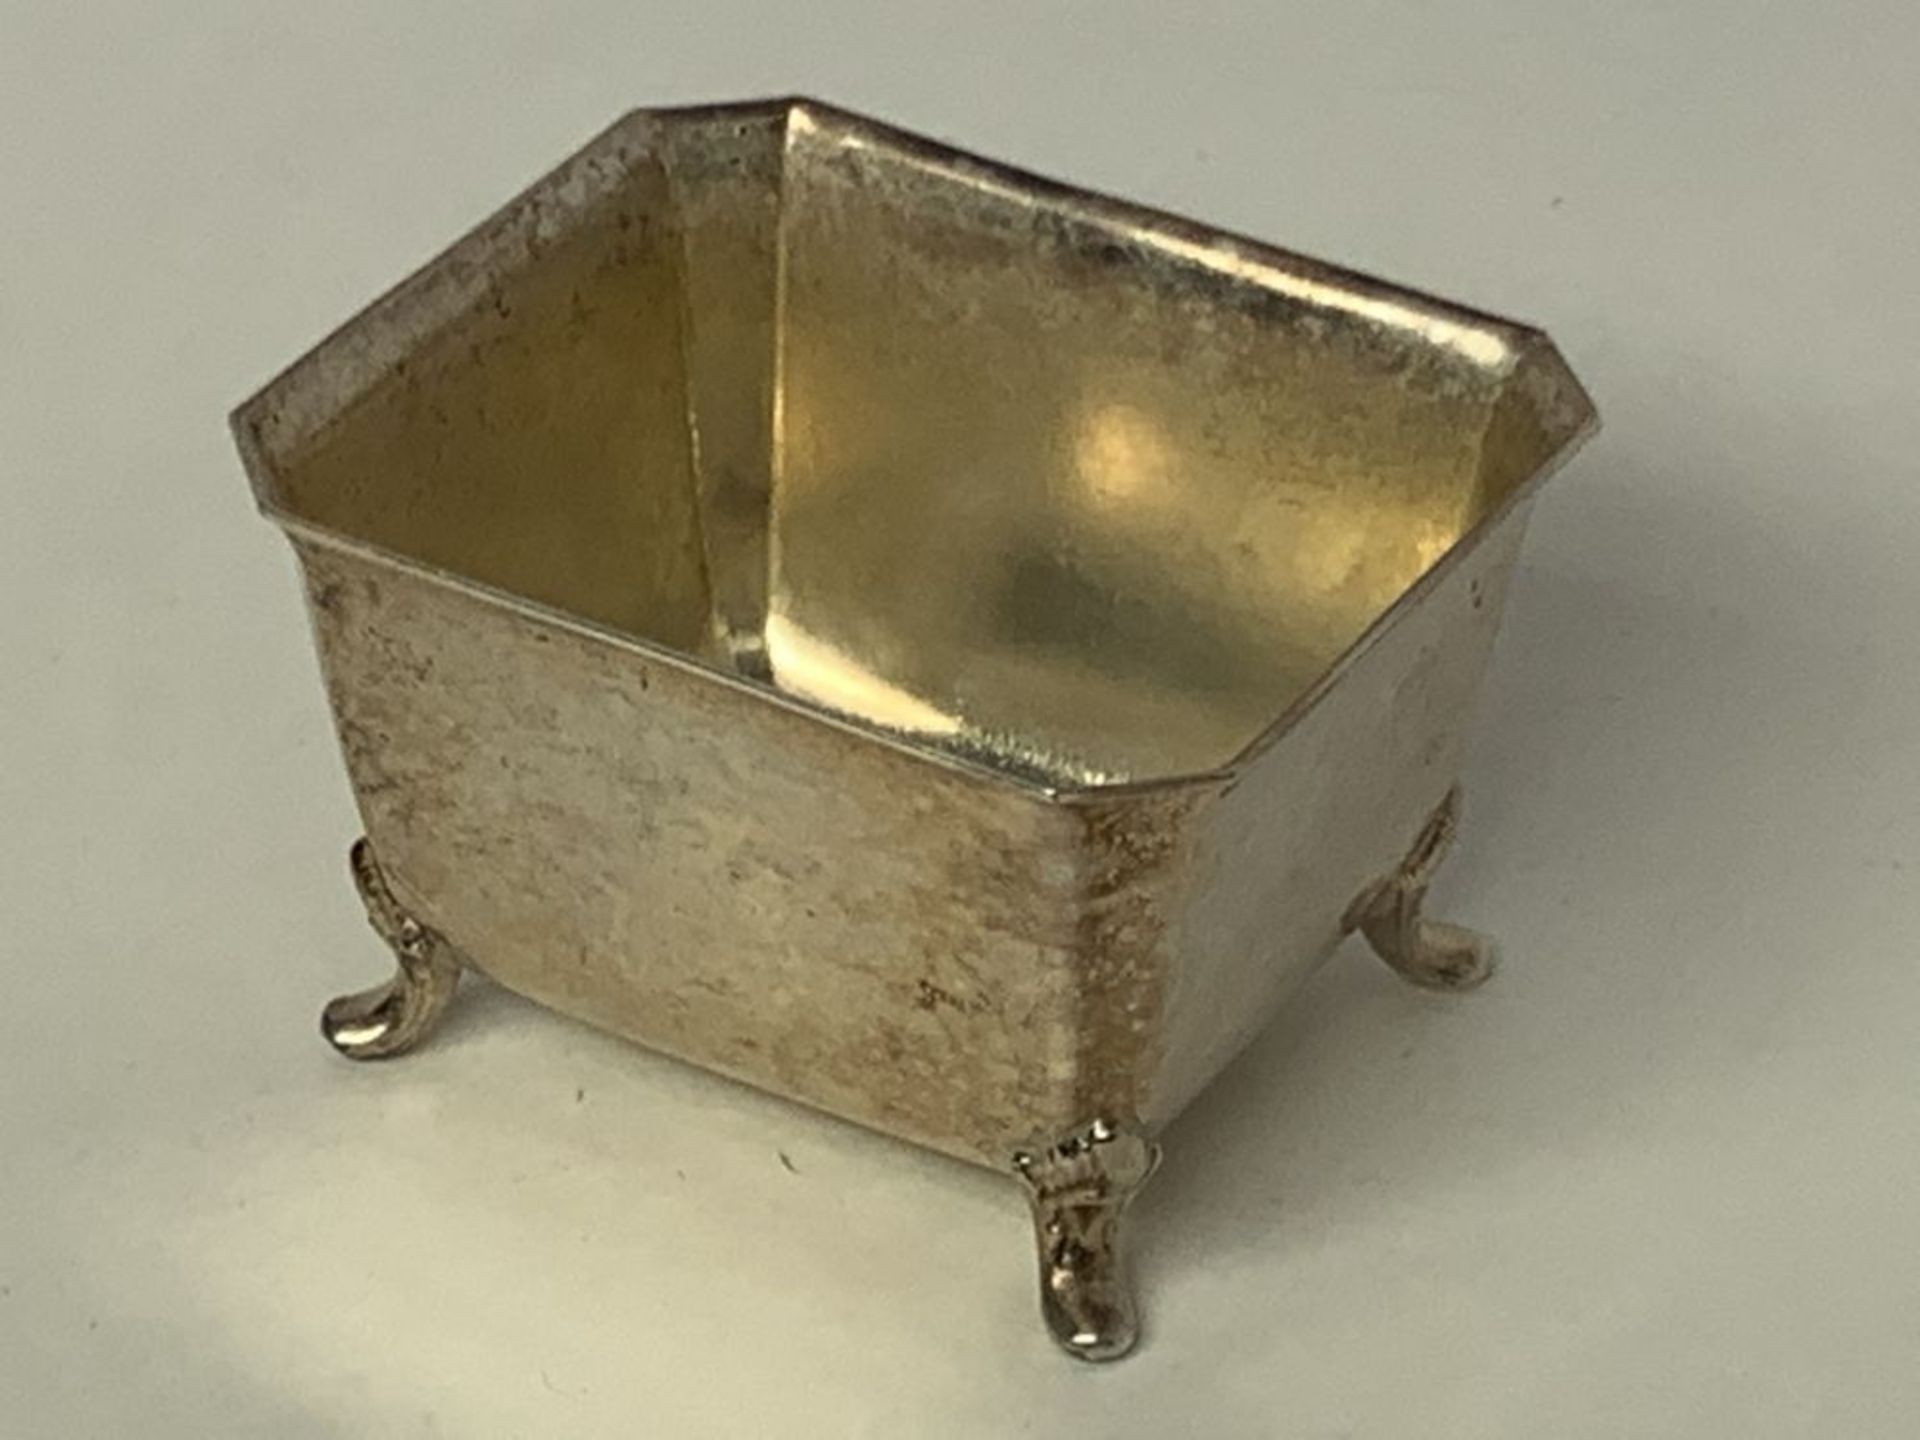 Antique Silver Cup/Bowl. Measures approx 2.75" wide, 1.75" tall.